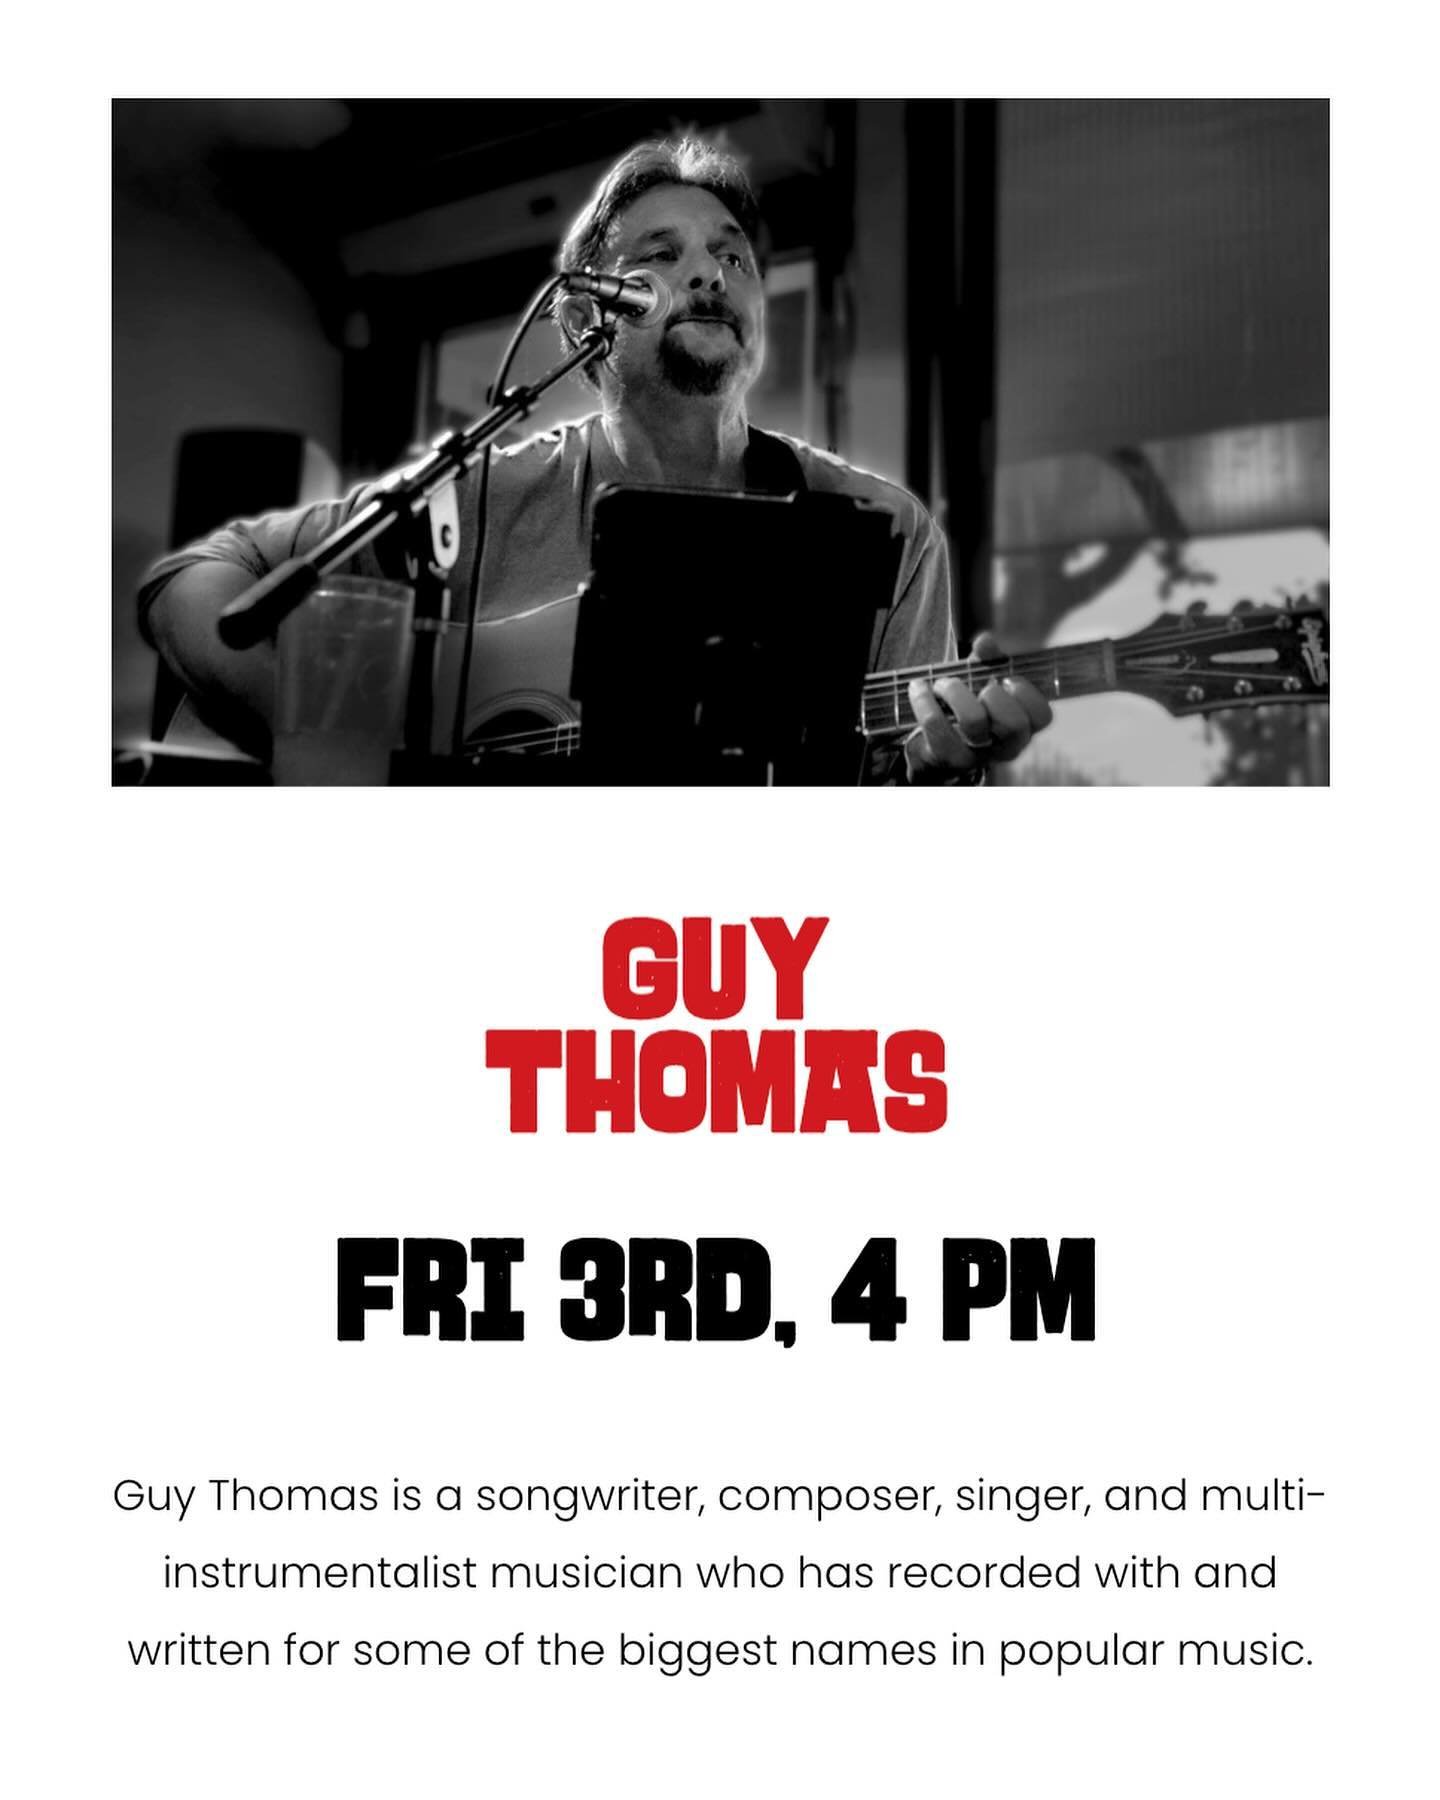 🌟 SAGEBRUSH CANTINA WEEKEND 🌟

THE WEEKND STARTS HERE! Join us for an unforgettable lineup of live music and beats that&rsquo;ll keep you dancing all night long!

🎶 FRI 3rd

Guy Thomas | 4 PM | Songwriter, composer, and multi-instrumentalist bring